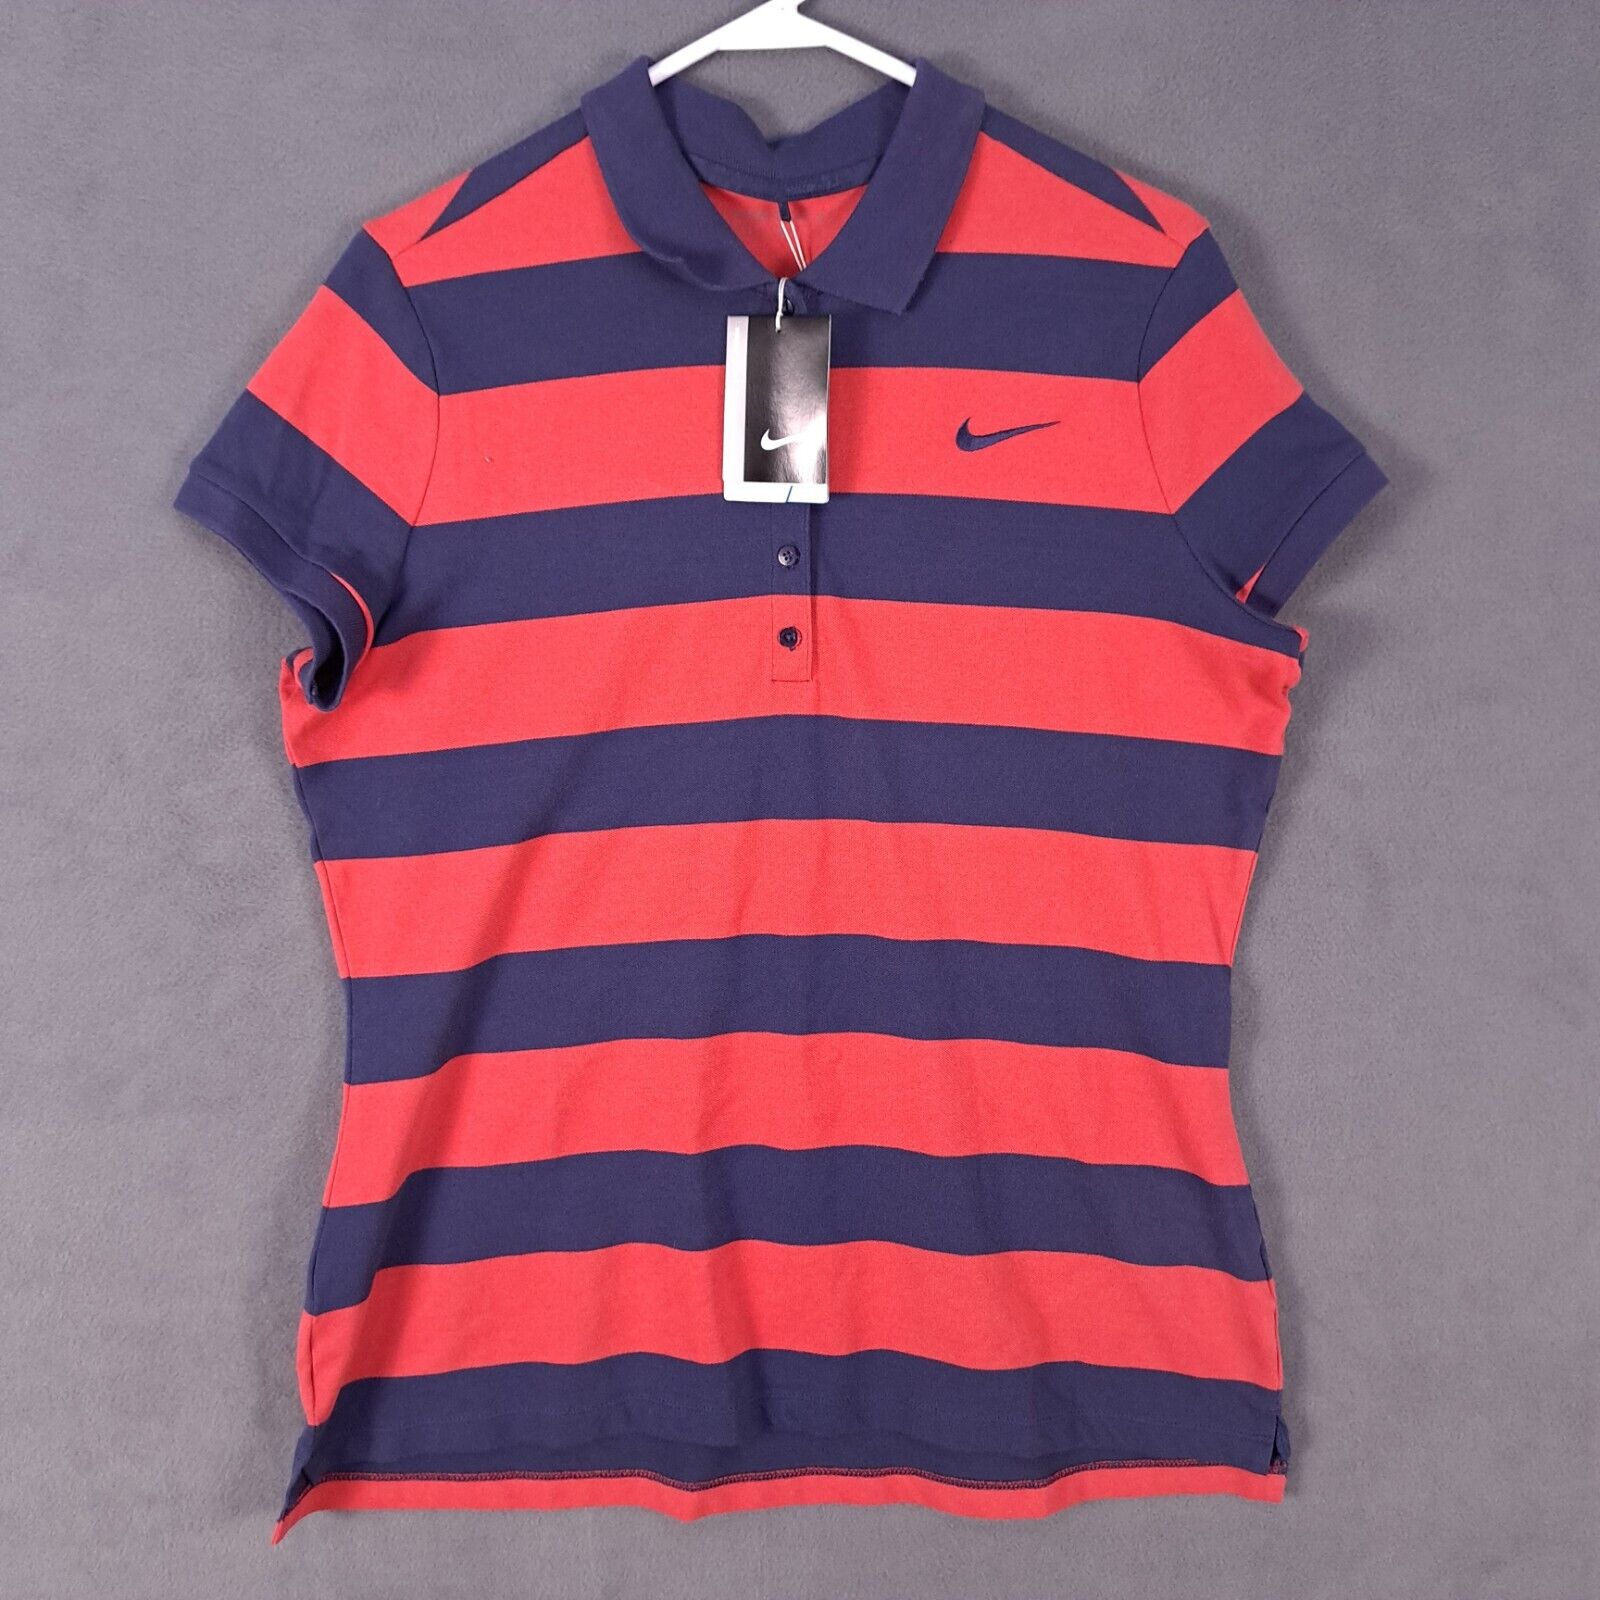 Nike Golf Shirt Womens Extra Large Red Blue Striped Polo New Dri Fit 